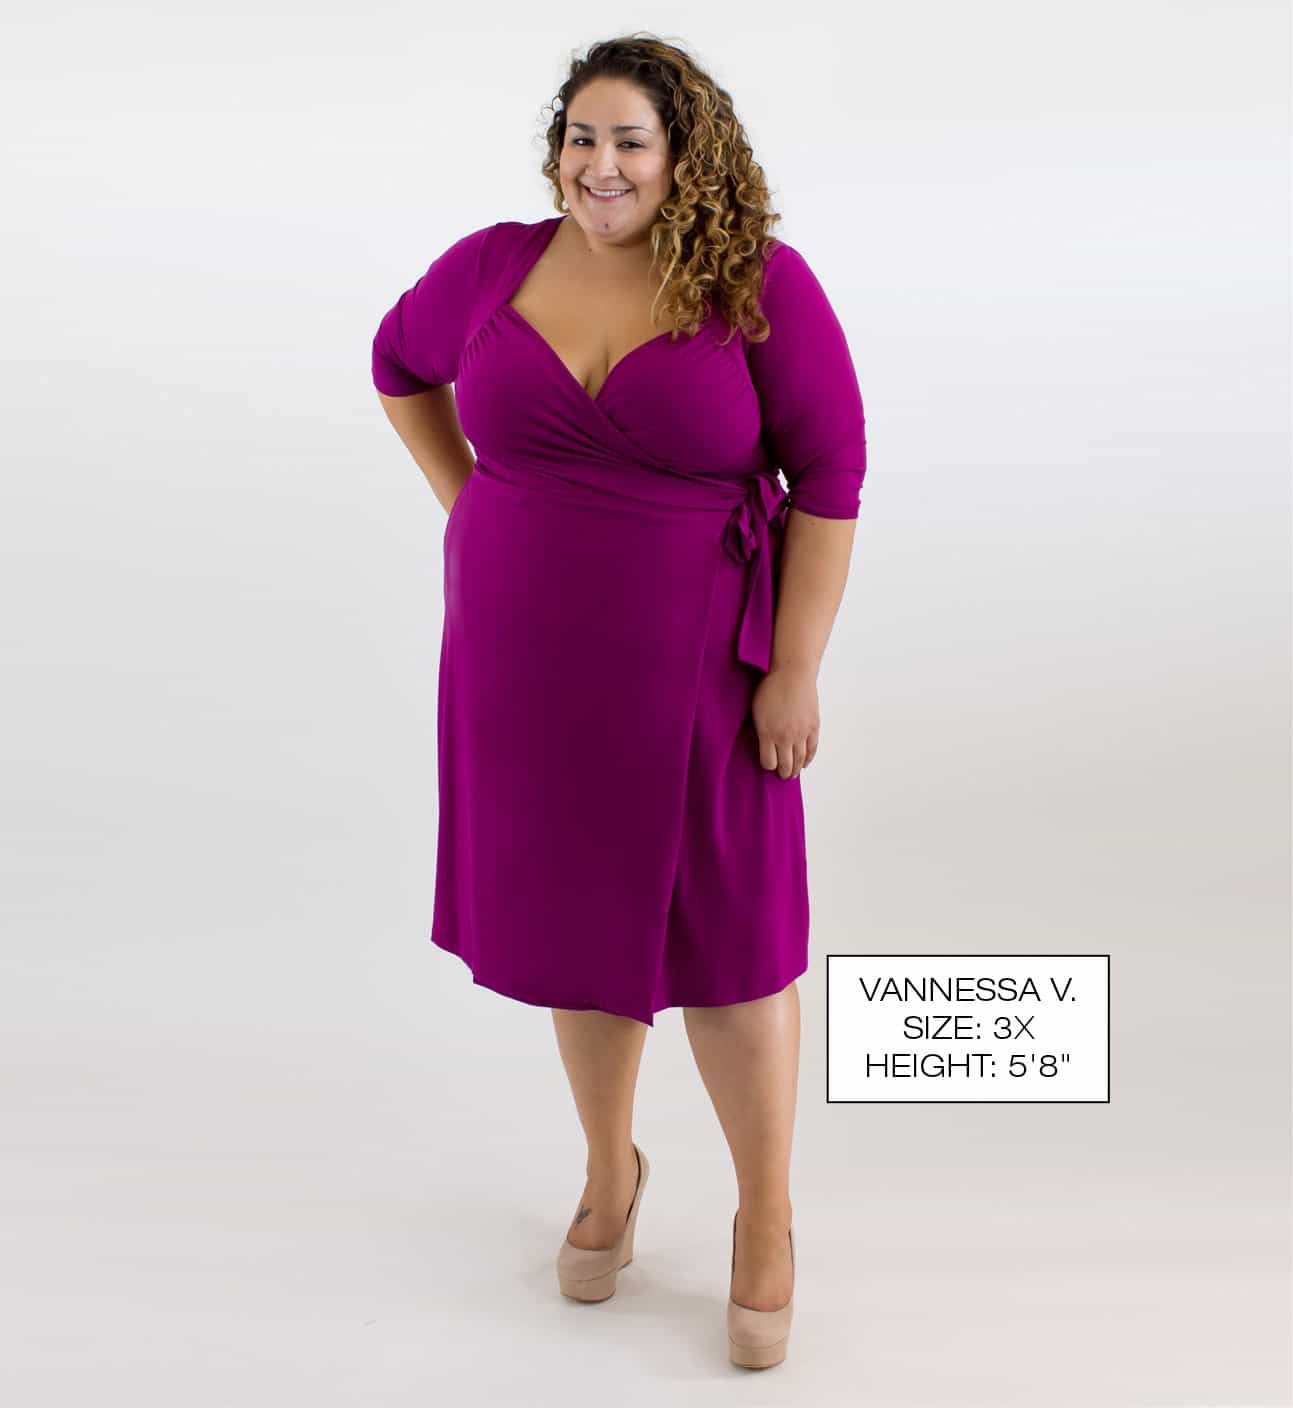 Download this Showing Plus Size... picture